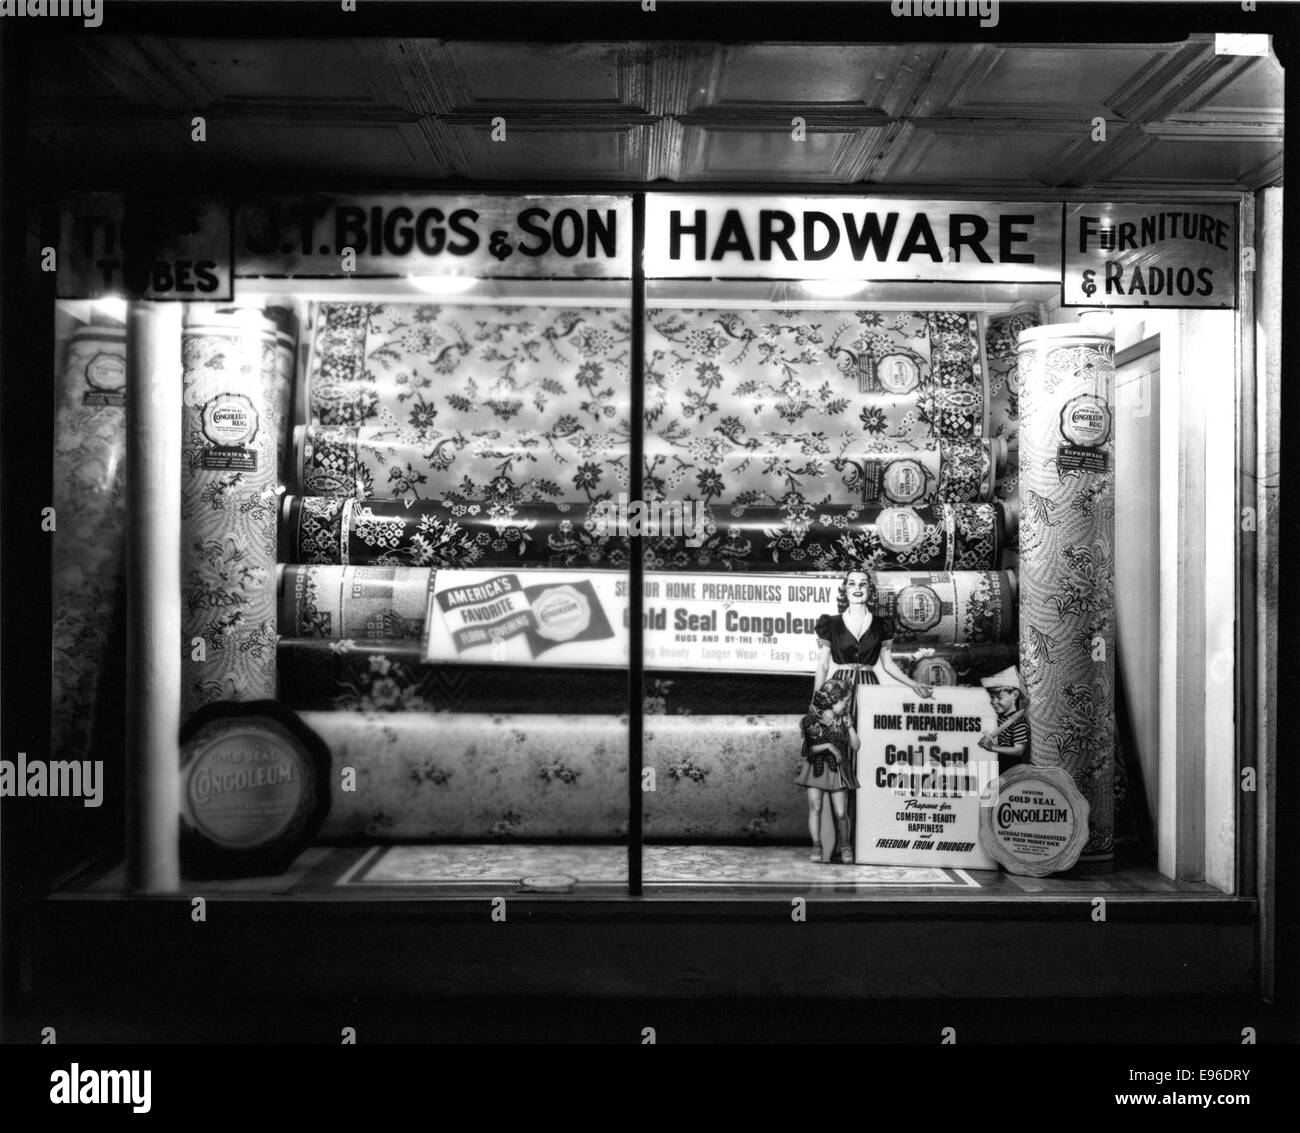 J T Biggs and Son Hardware, storefront display 13089512463 o Stock Photo